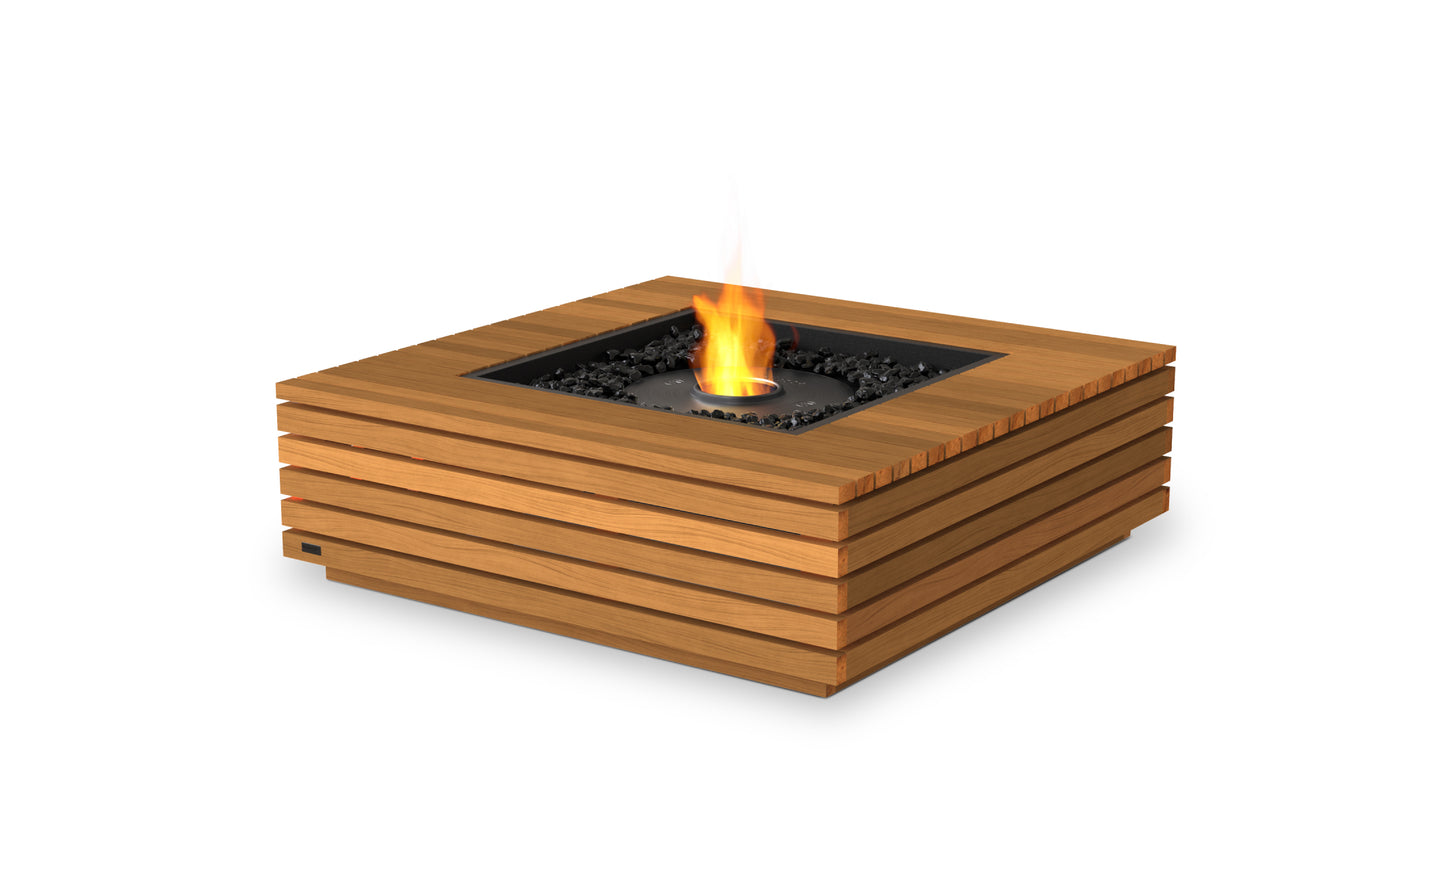 EcoSmart Fire Base 40 Fire Pit Table with Bioethanol Sustainable Fuel - PadioLiving - EcoSmart Fire Base 40 Fire Pit Table with Bioethanol Sustainable Fuel - Fire Pit - PadioLiving